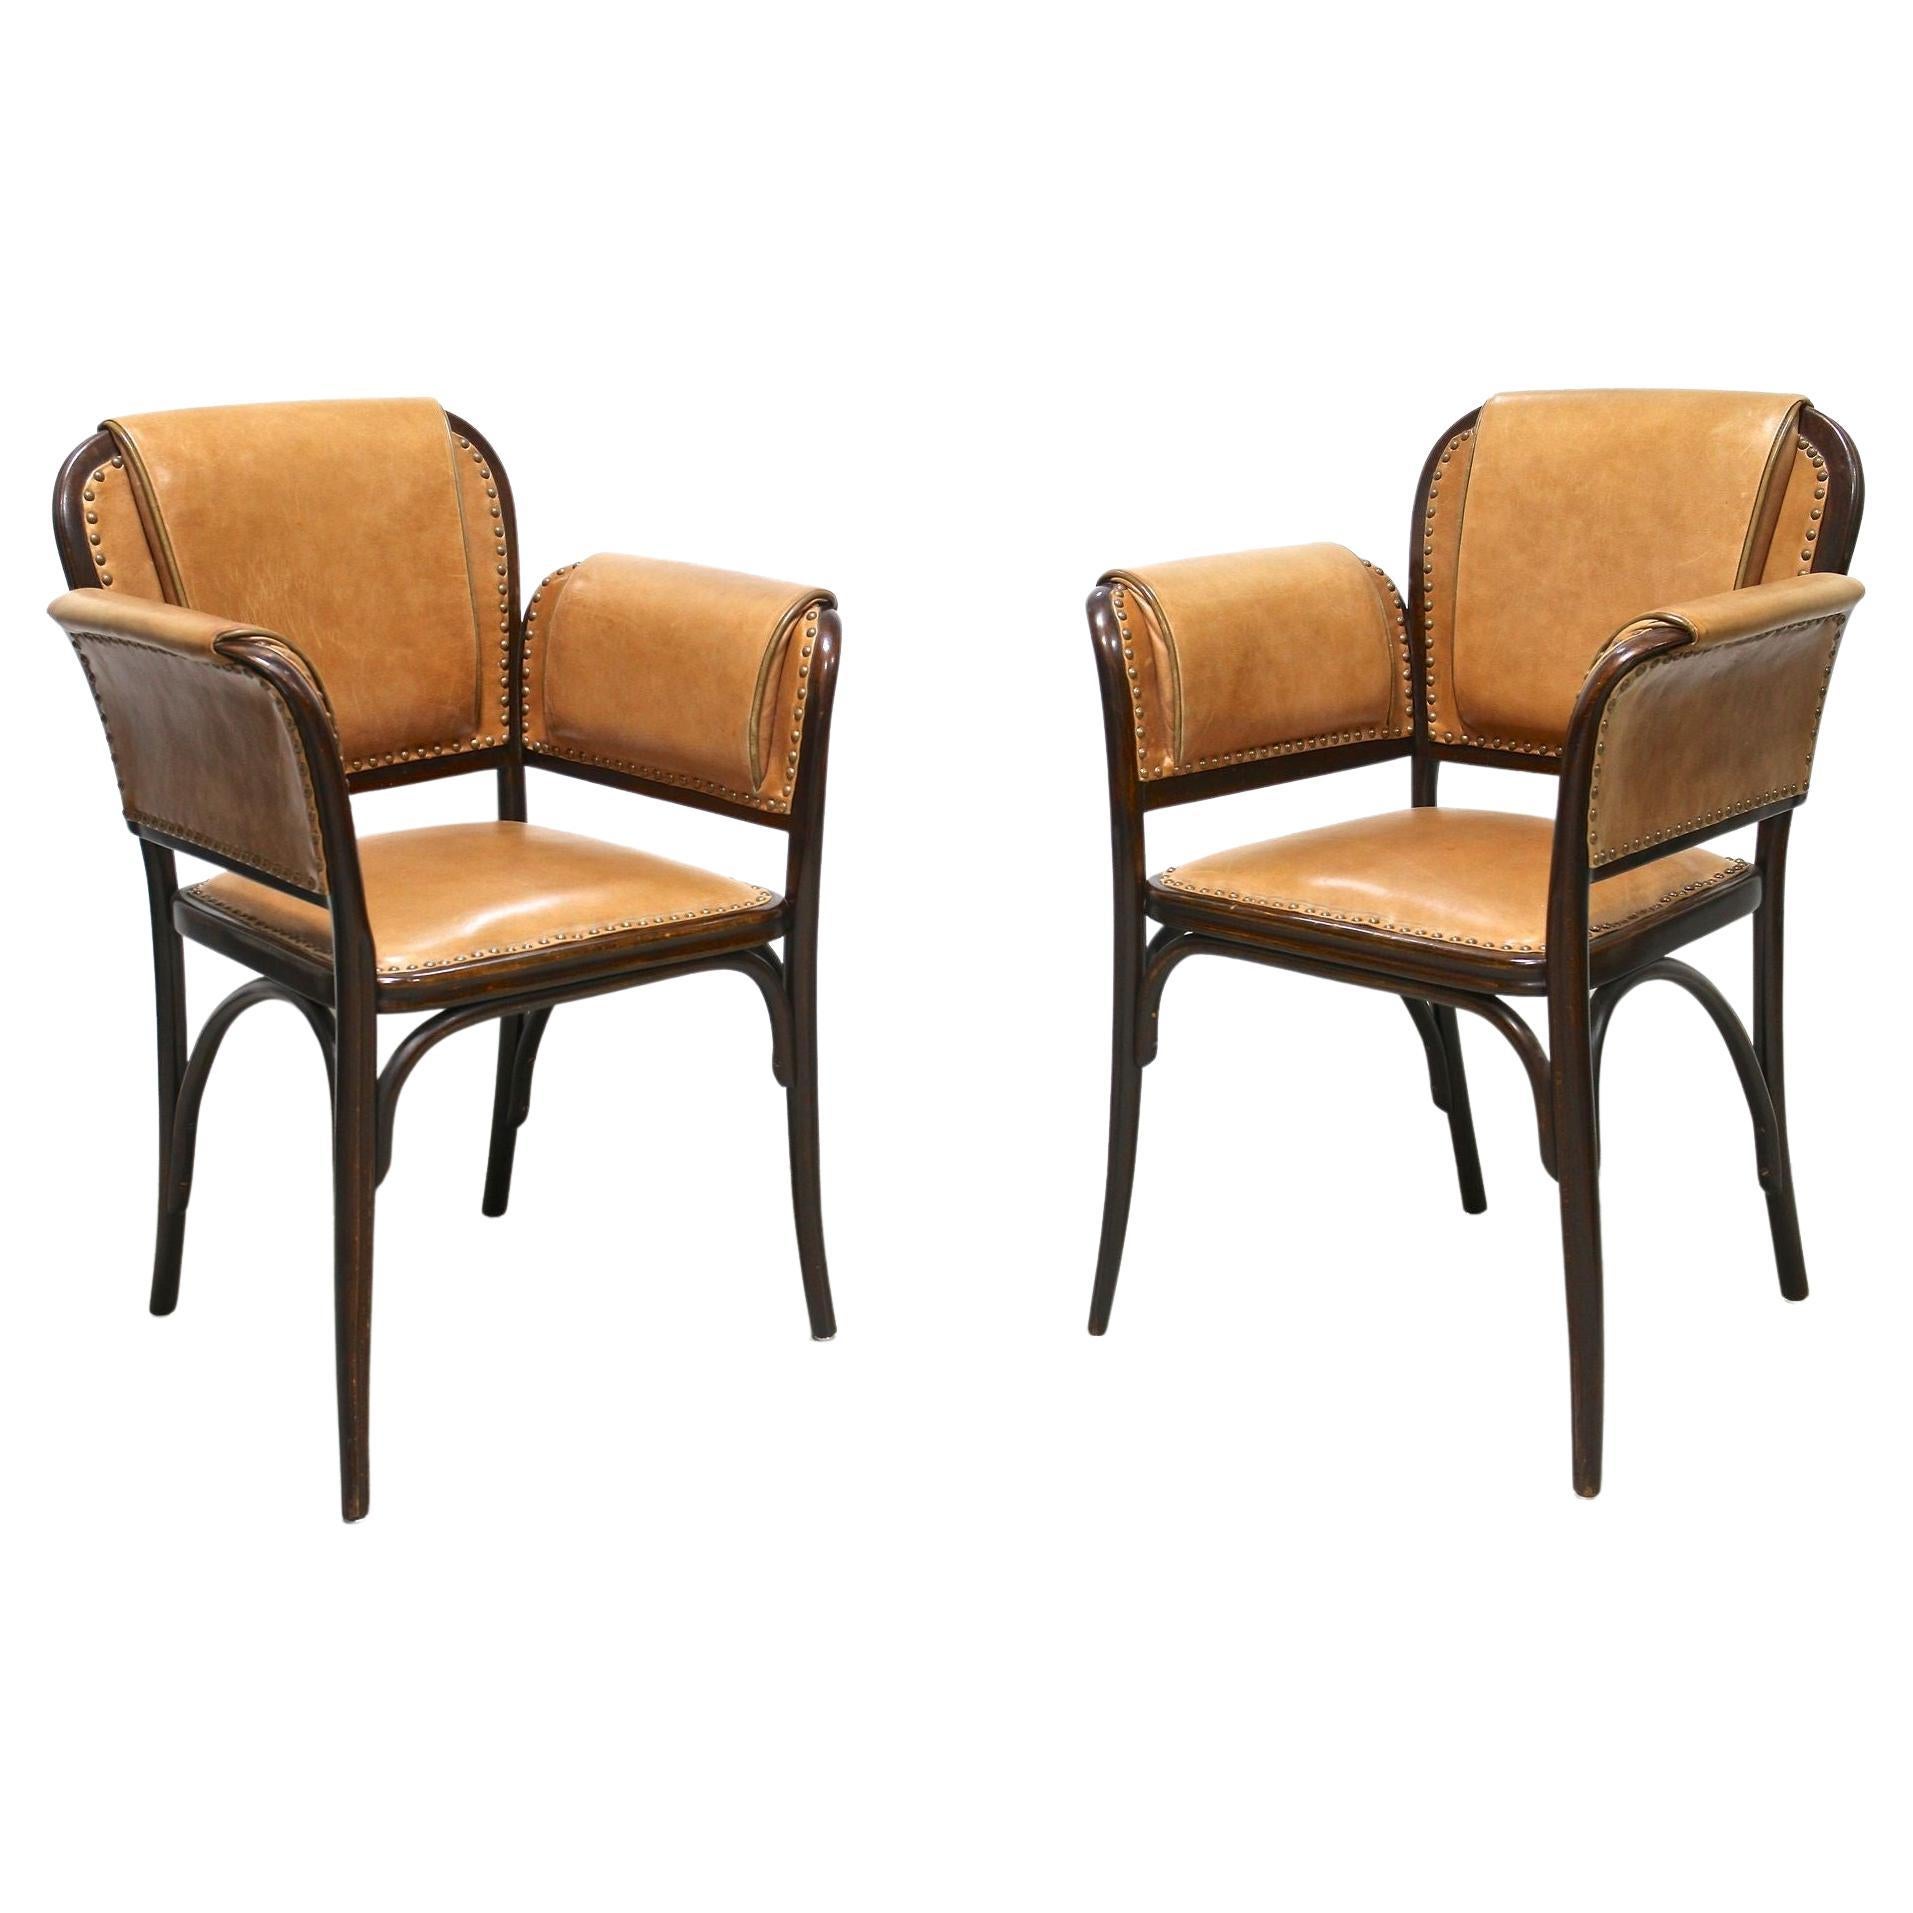 Pair of 20th Century Art Nouveau Bentwood Armchairs by Thonet, Austria, Ca. 1904